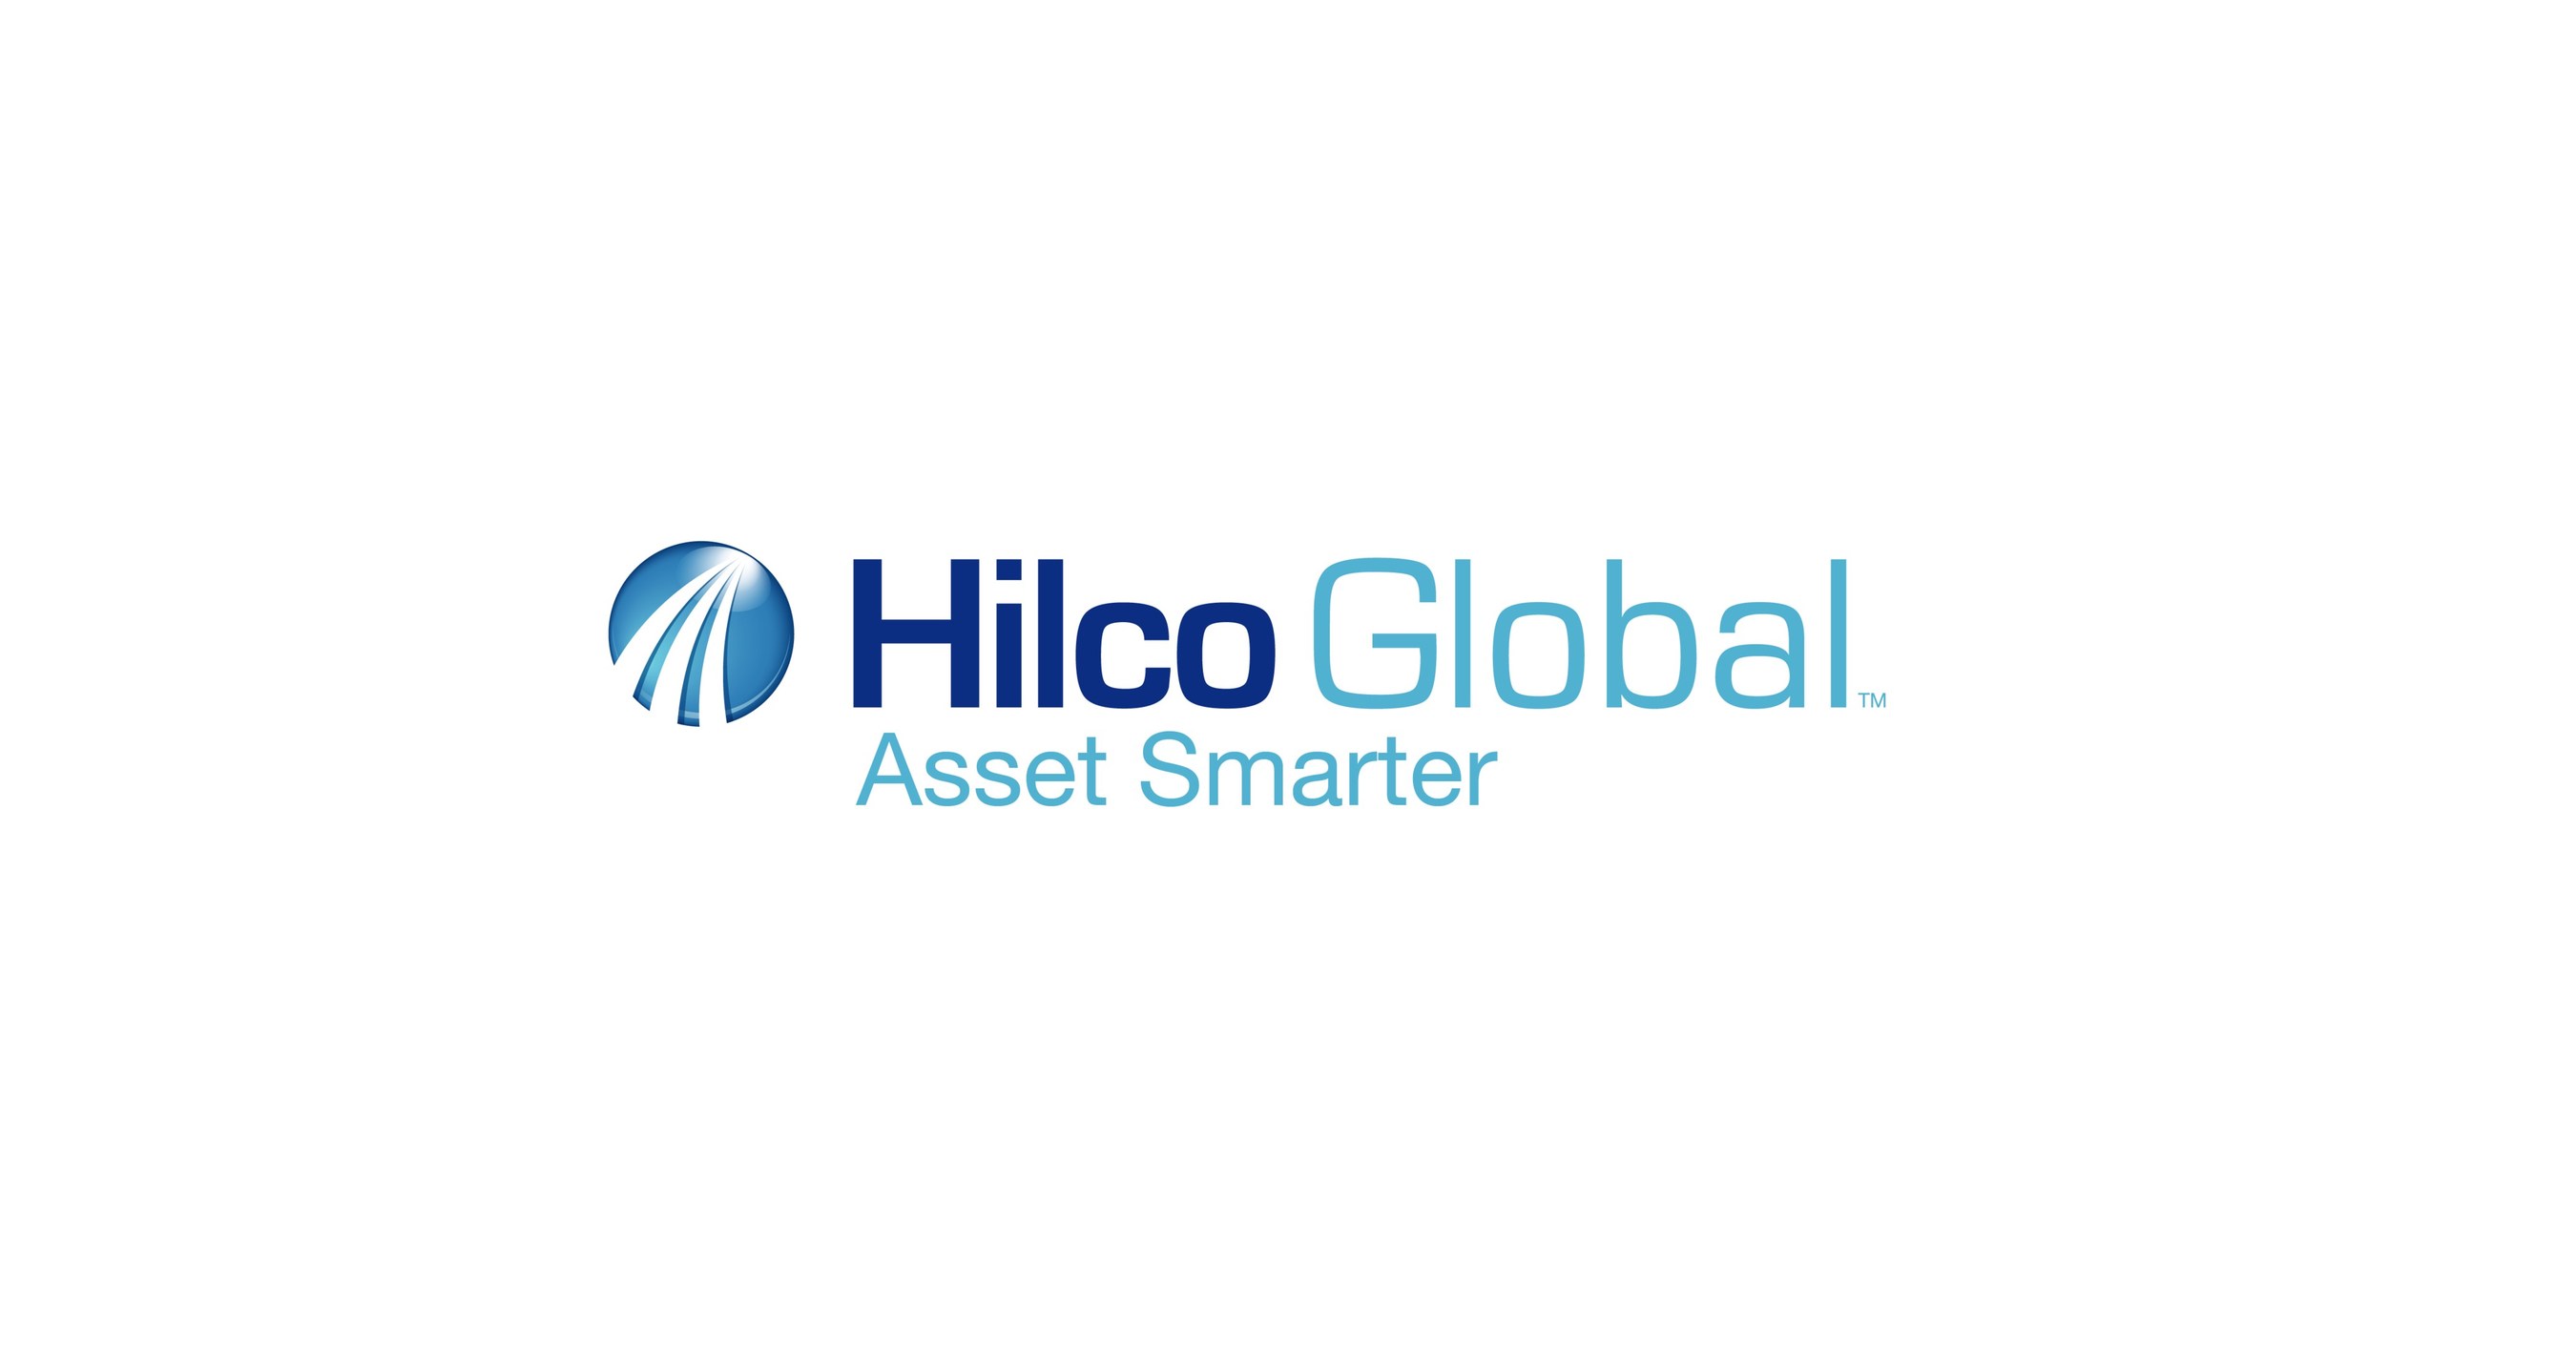 global financial services firm logo